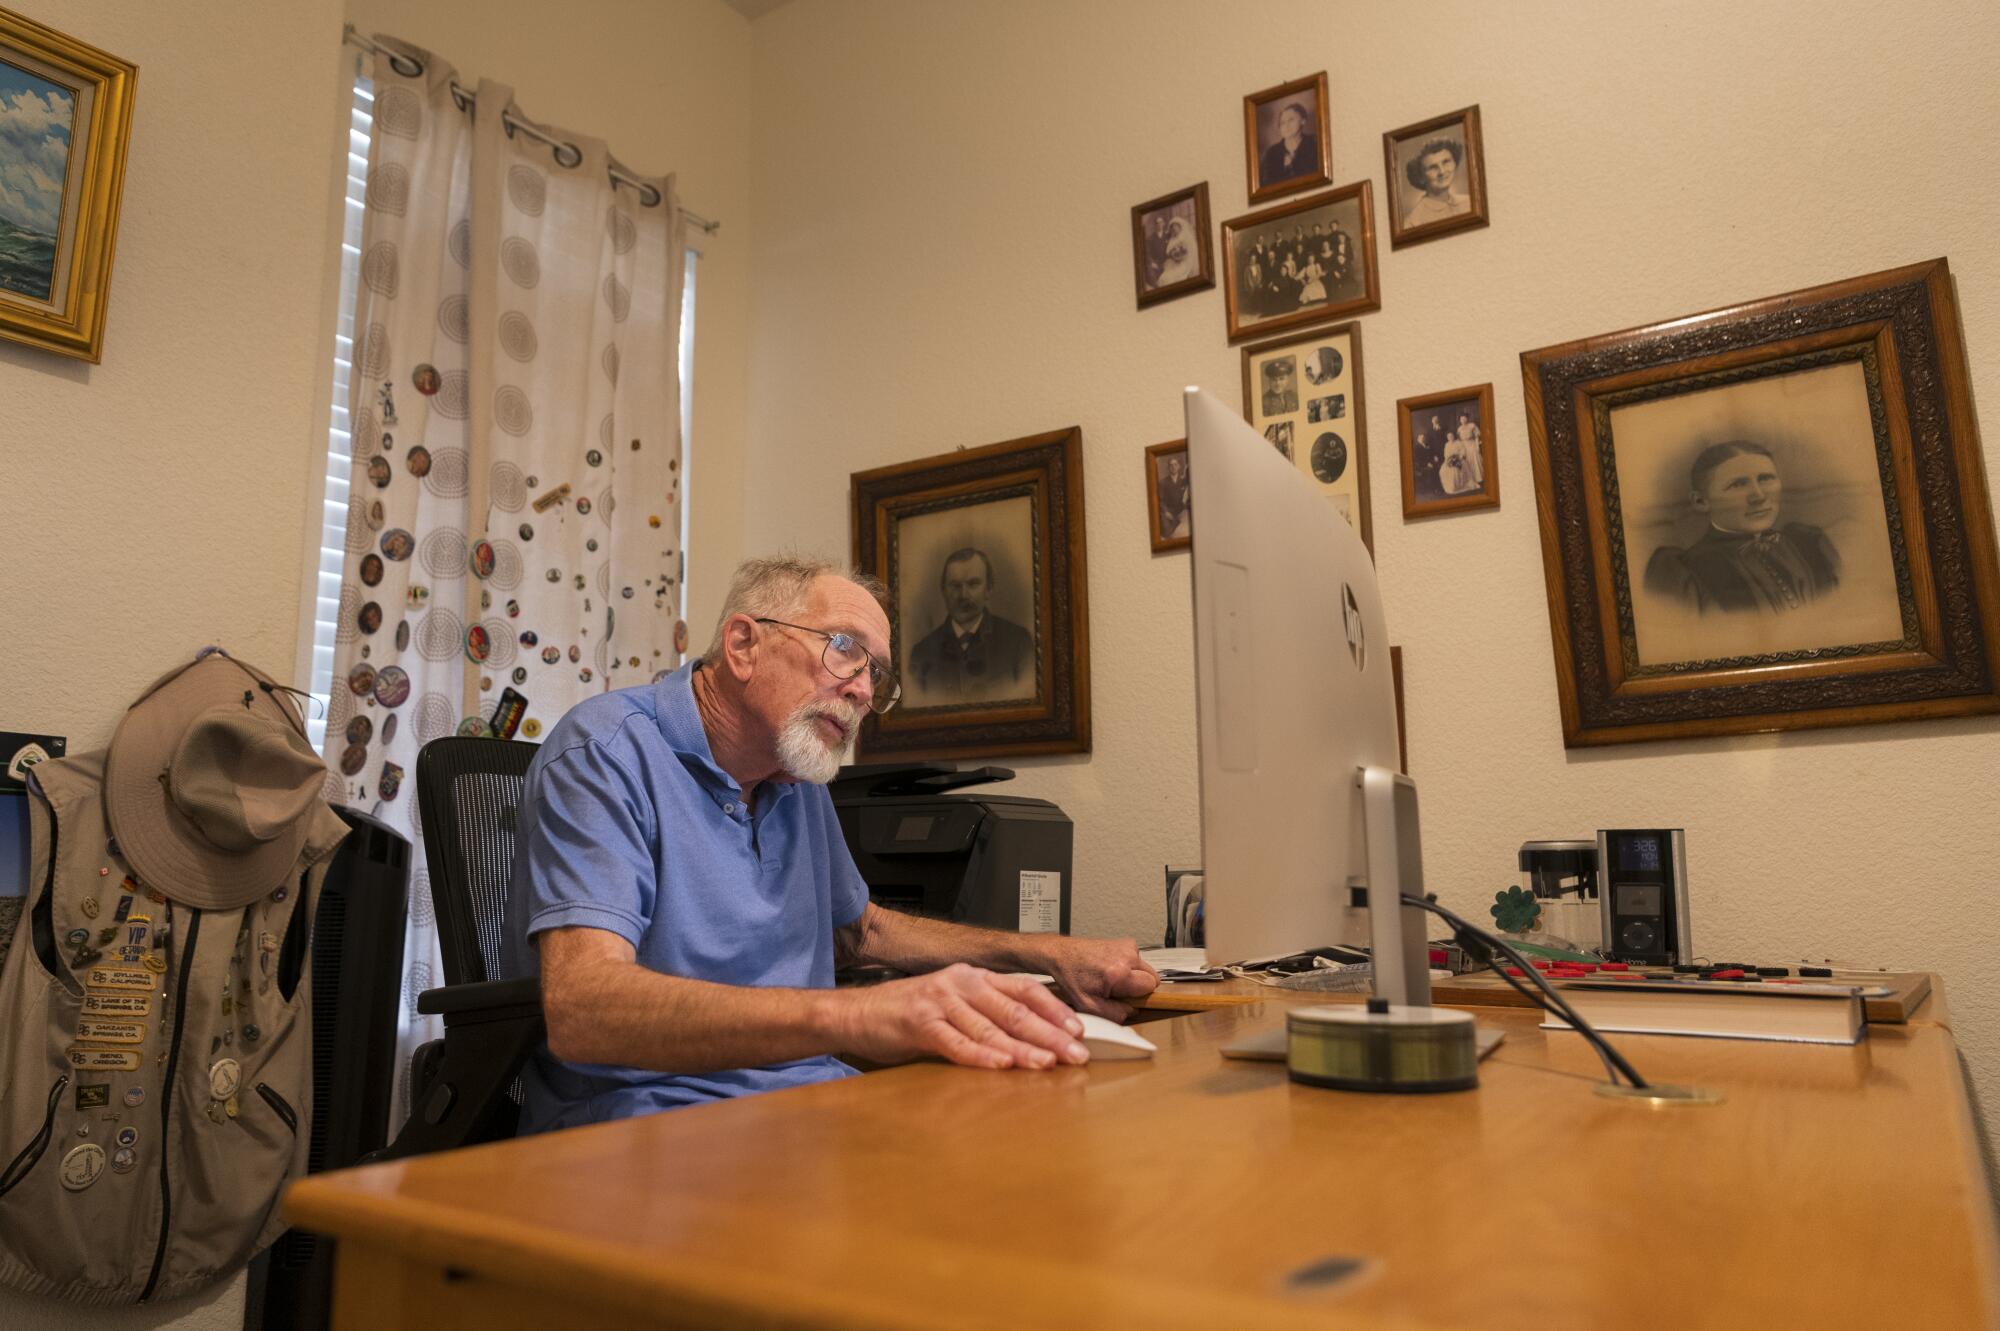 Surrounded by family photos, Gary Mund checks his email in Sparks, Nev.